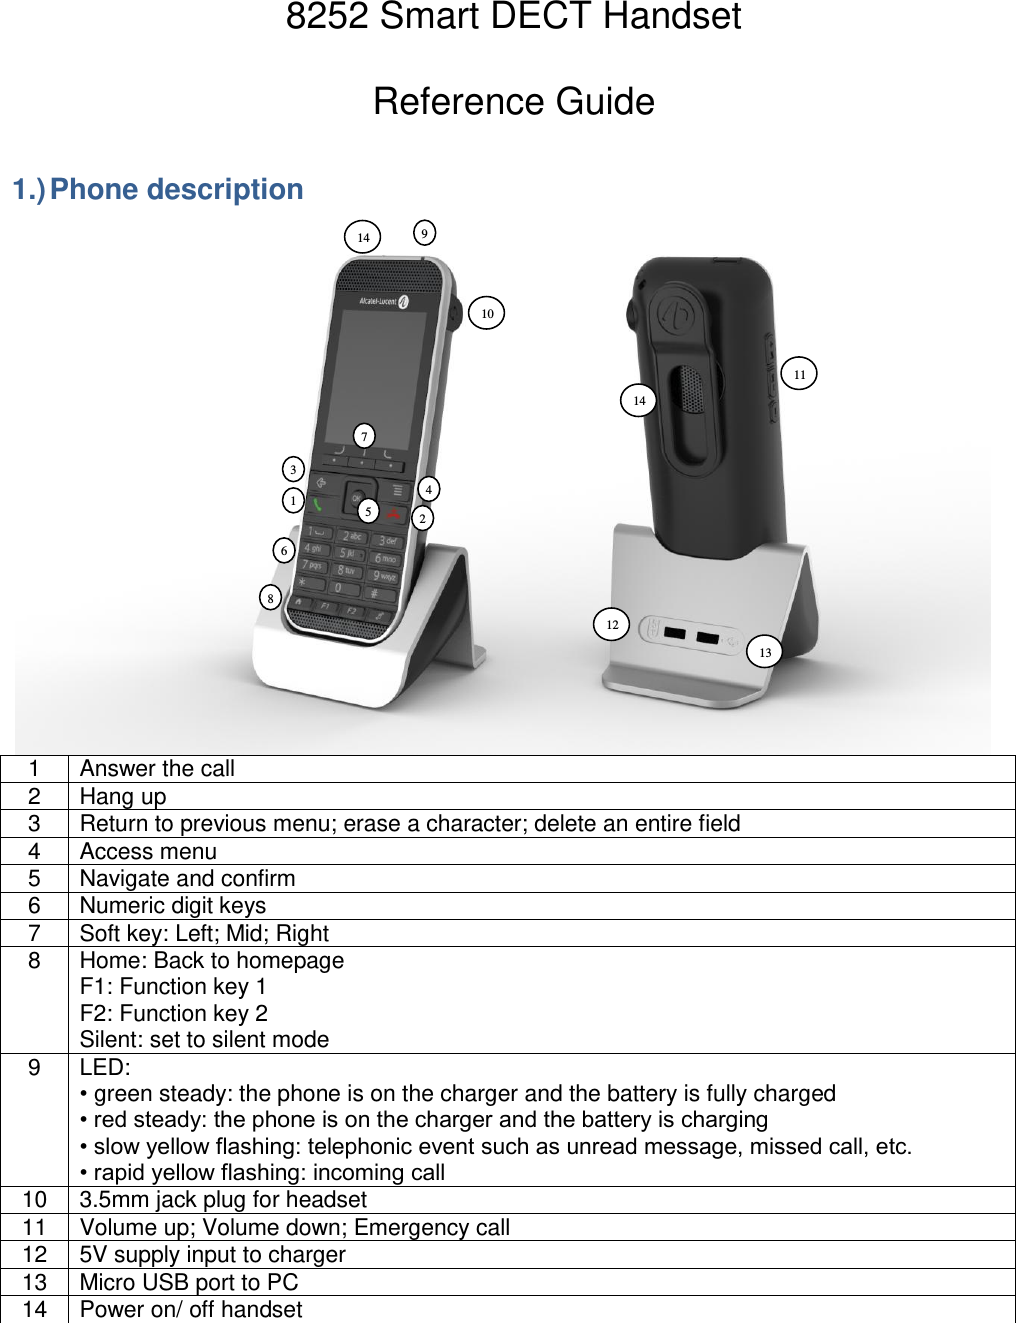 8252 Smart DECT Handset  Reference Guide 1.) Phone description  1 Answer the call 2 Hang up 3 Return to previous menu; erase a character; delete an entire field 4 Access menu 5 Navigate and confirm 6 Numeric digit keys 7 Soft key: Left; Mid; Right 8 Home: Back to homepage F1: Function key 1 F2: Function key 2 Silent: set to silent mode 9 LED: • green steady: the phone is on the charger and the battery is fully charged • red steady: the phone is on the charger and the battery is charging • slow yellow flashing: telephonic event such as unread message, missed call, etc. • rapid yellow flashing: incoming call 10 3.5mm jack plug for headset 11 Volume up; Volume down; Emergency call 12 5V supply input to charger 13 Micro USB port to PC 14 Power on/ off handset 1 2 3 4 5 9 6 7 8  11  10  12  13  14  14 